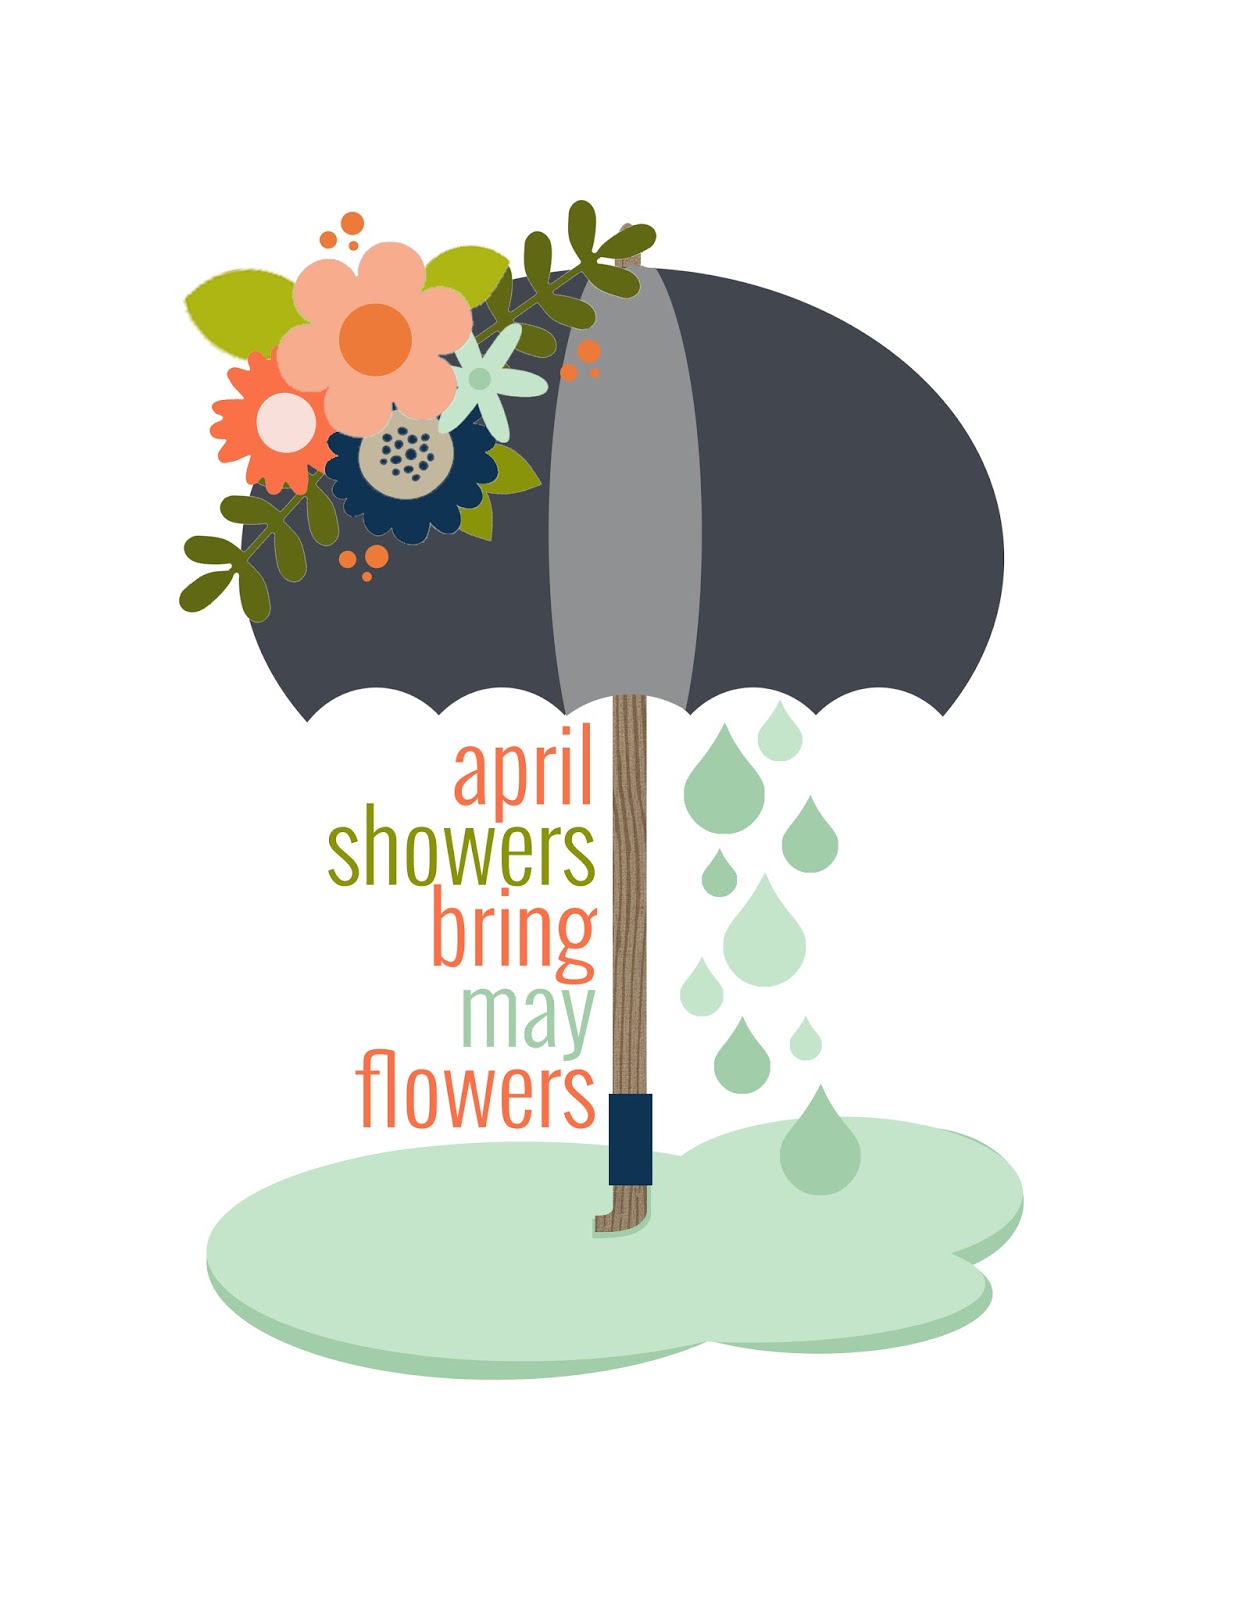 Pin and Print this FREE Spring Printable! | Jen Gallacher